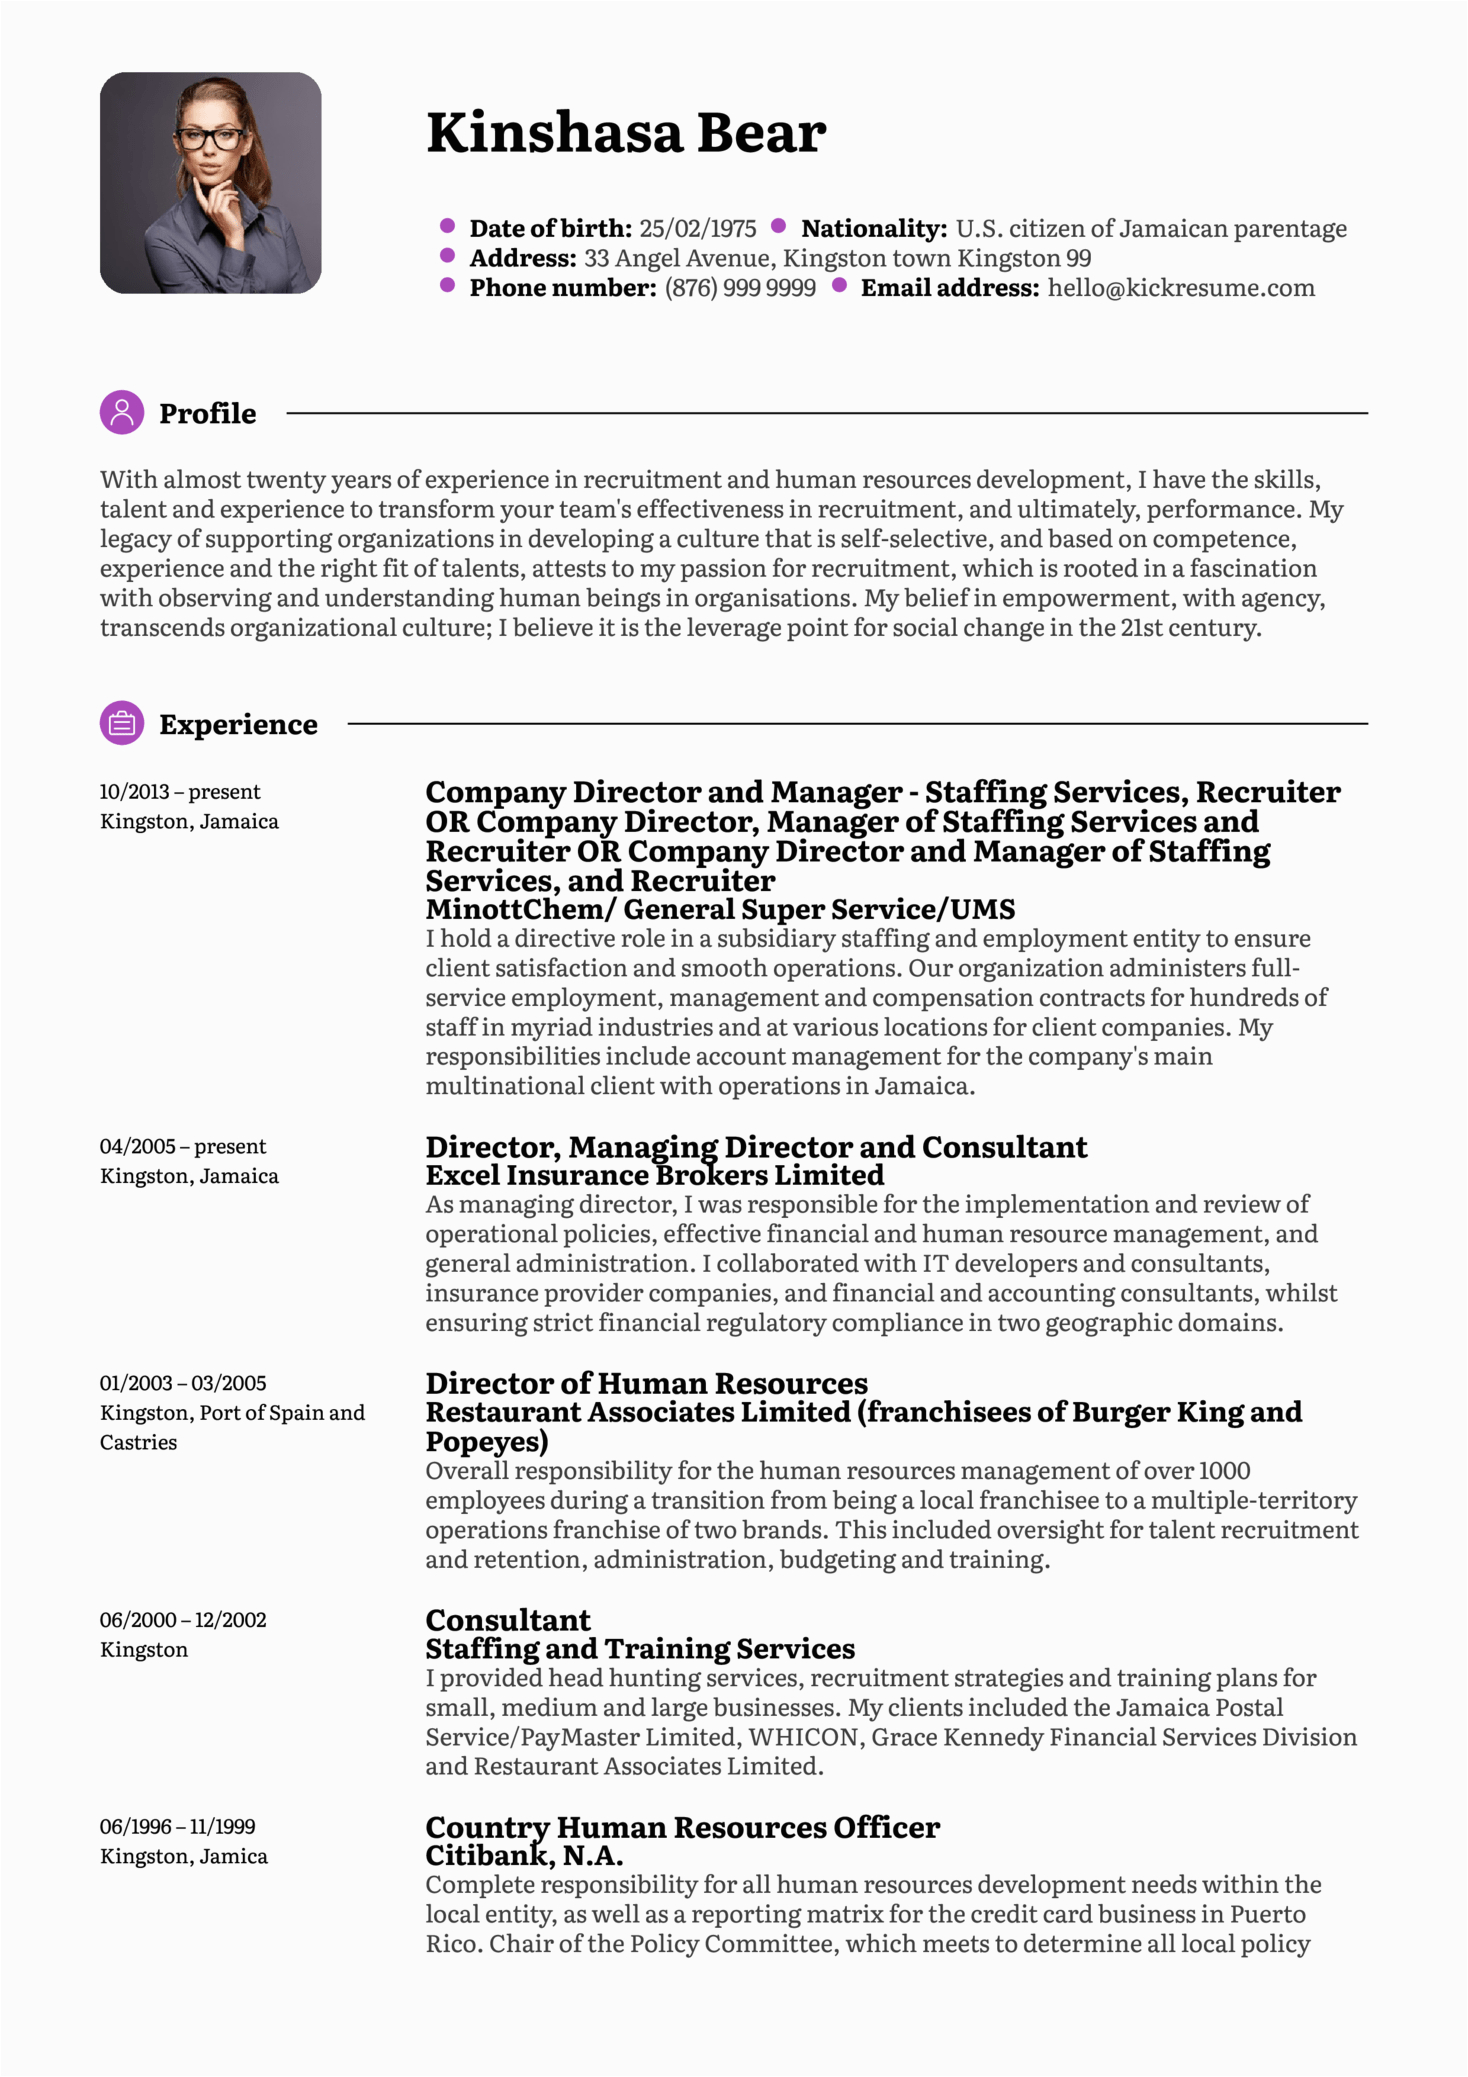 Resume Profile Samples for Human Resources Human Resources Ficer Consultant Resume Sample